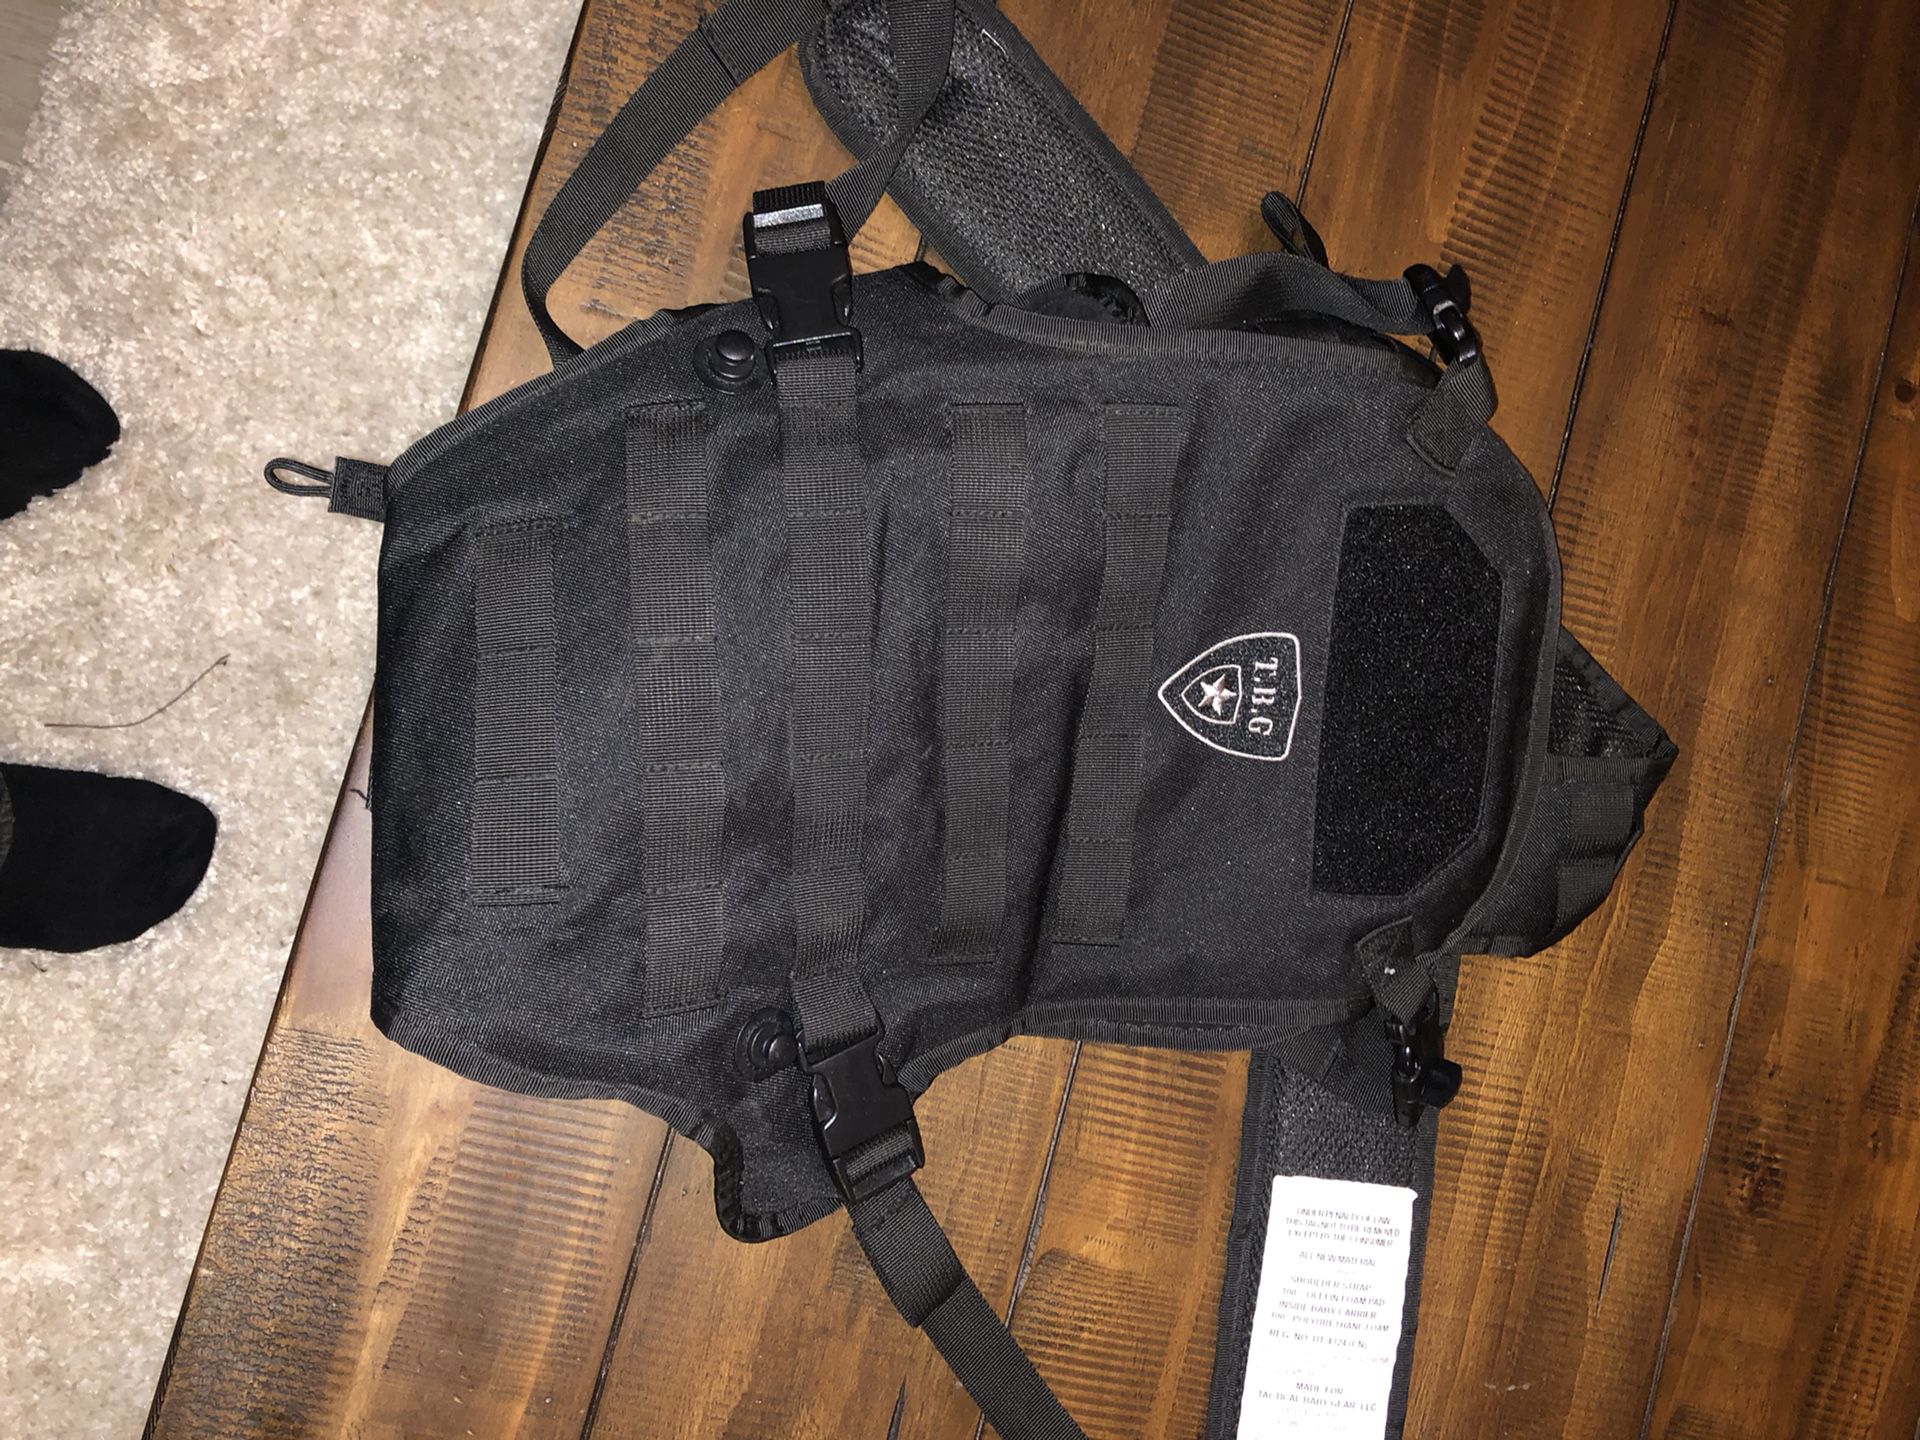 Tactical Baby Gear Baby carrier